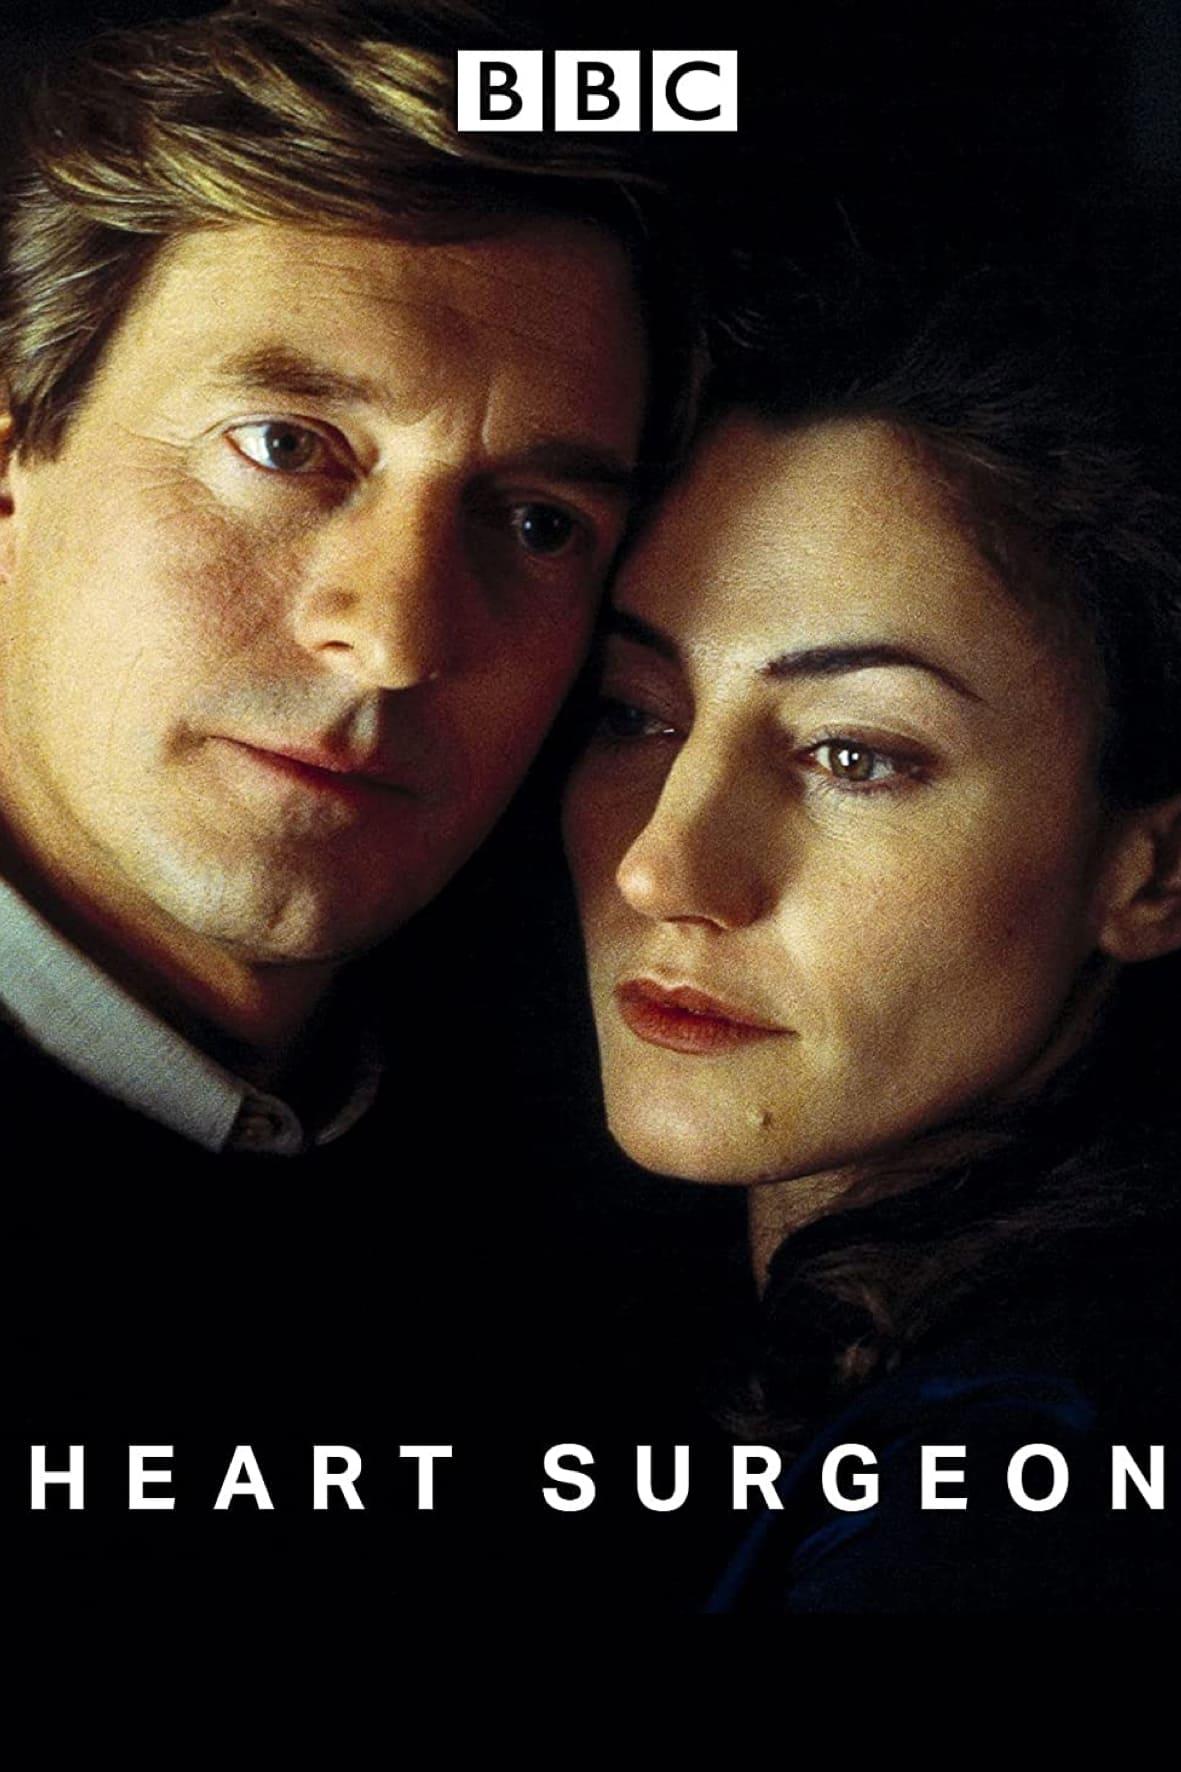 The Heart Surgeon poster